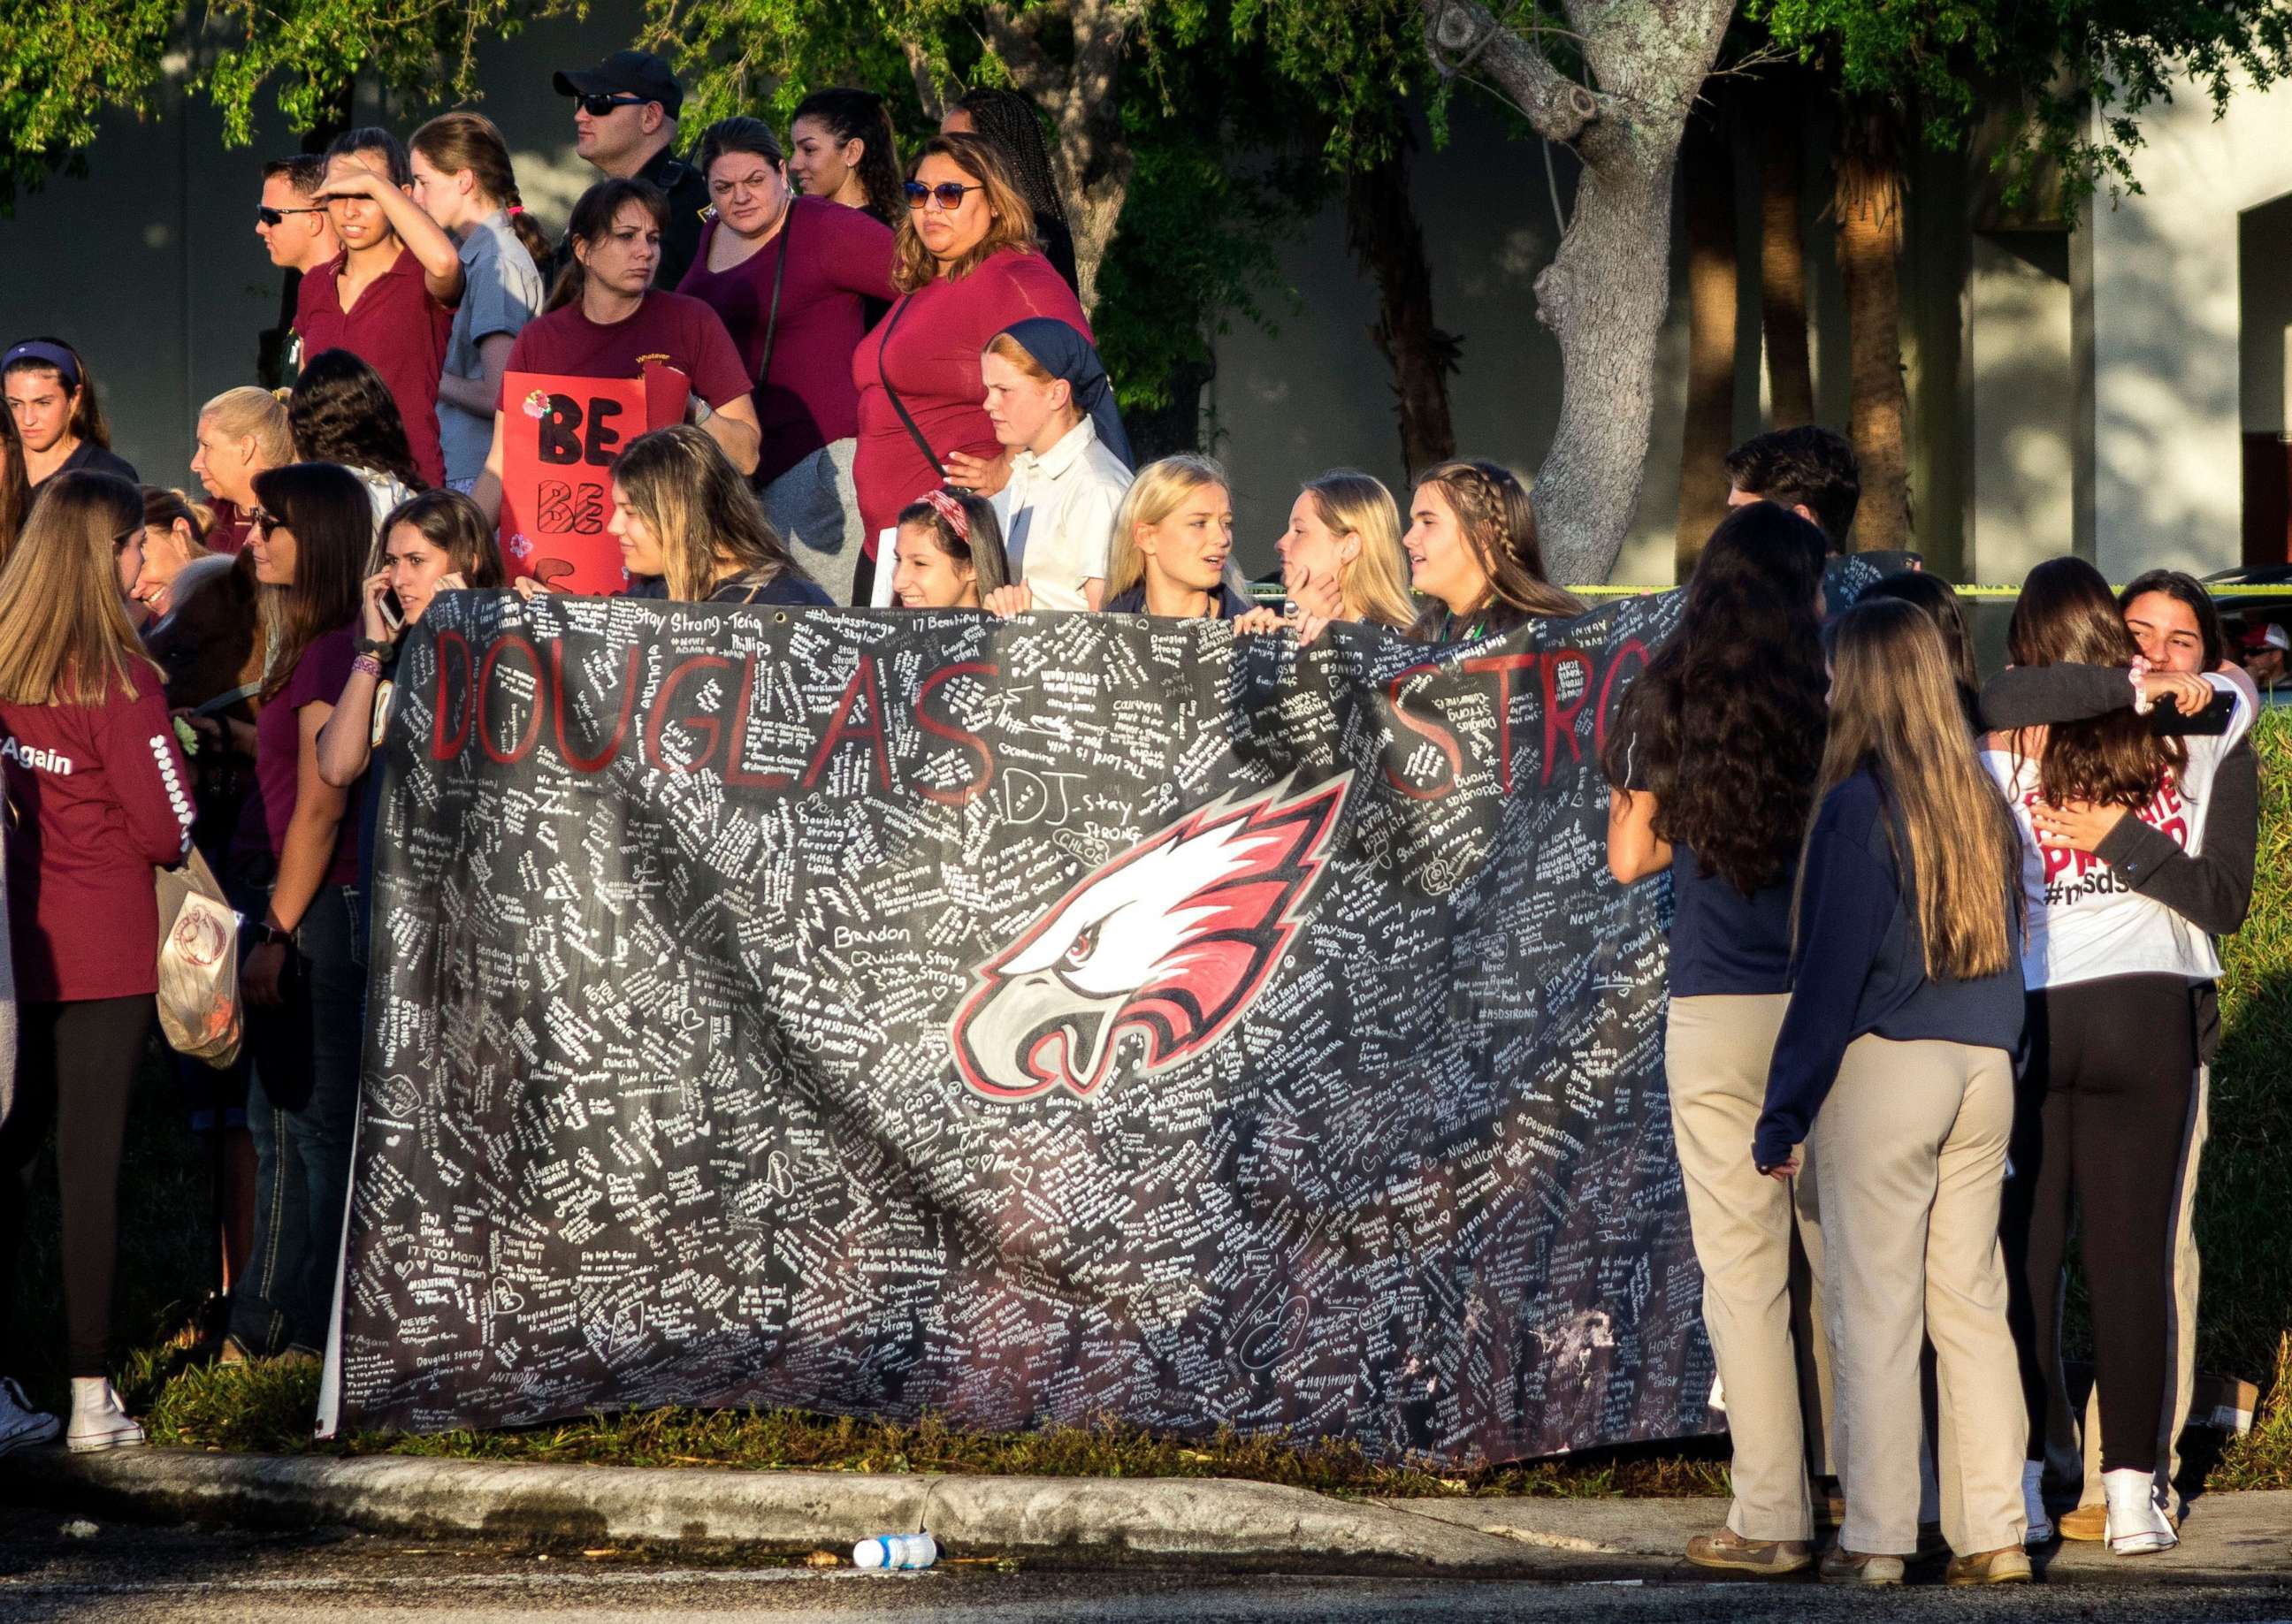 PHOTO: A banner bearing messages is held as parents and students arrive at Marjory Stoneman Douglas High School in Parkland, Fla., Feb. 28, 2018, for the school's reopening, two weeks after the mass shootings at the school.